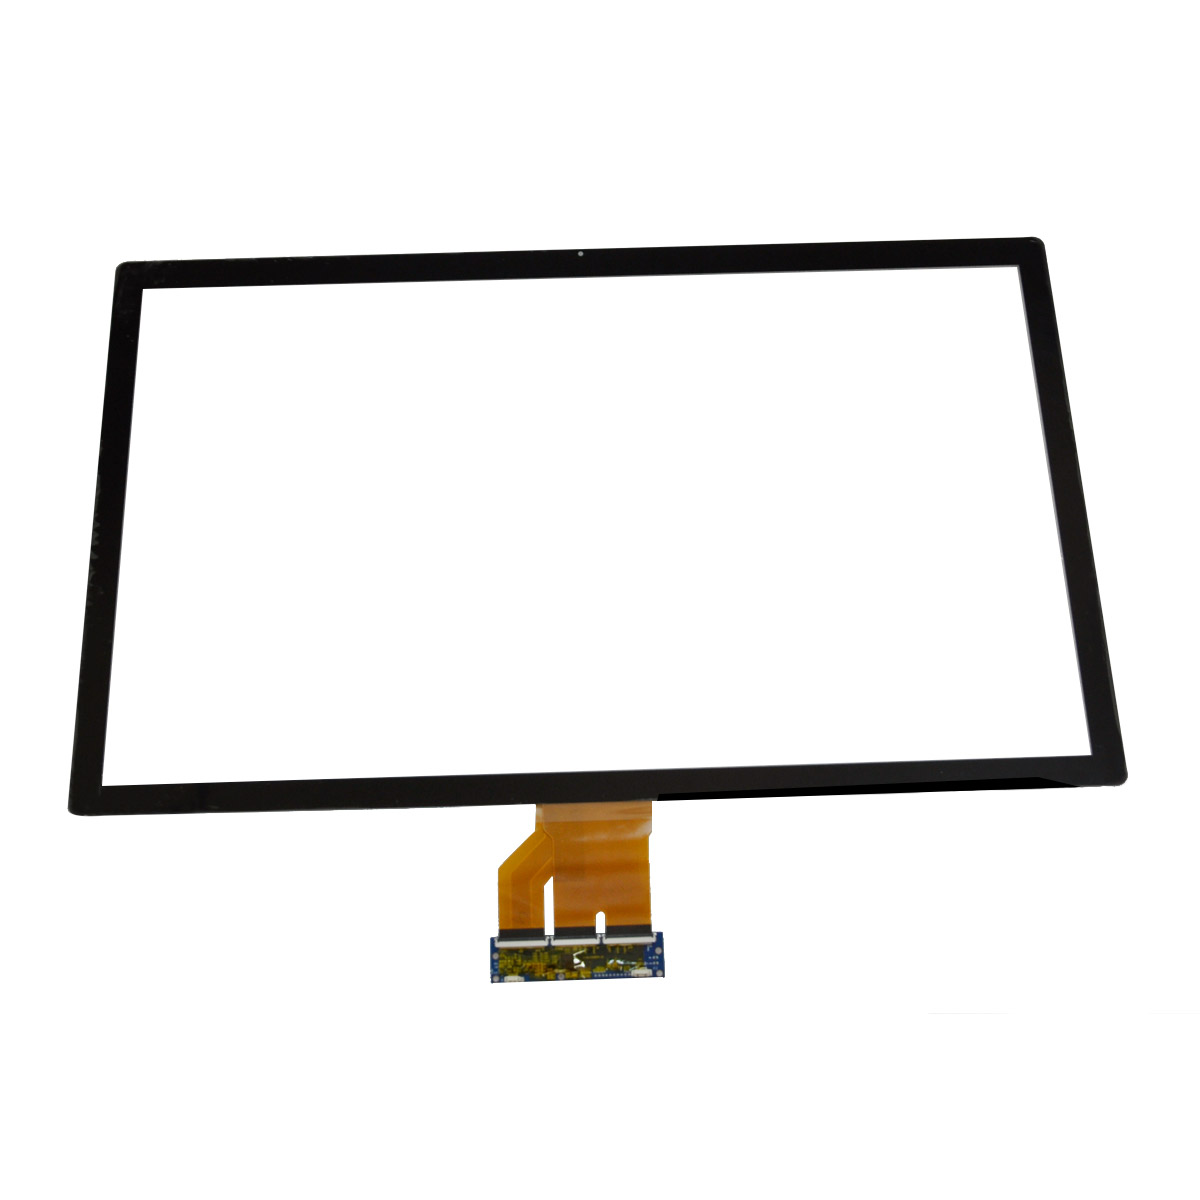 65 inch Projected Capacitive touch screen panel PCAP/PCT EETI/ilitek Controller